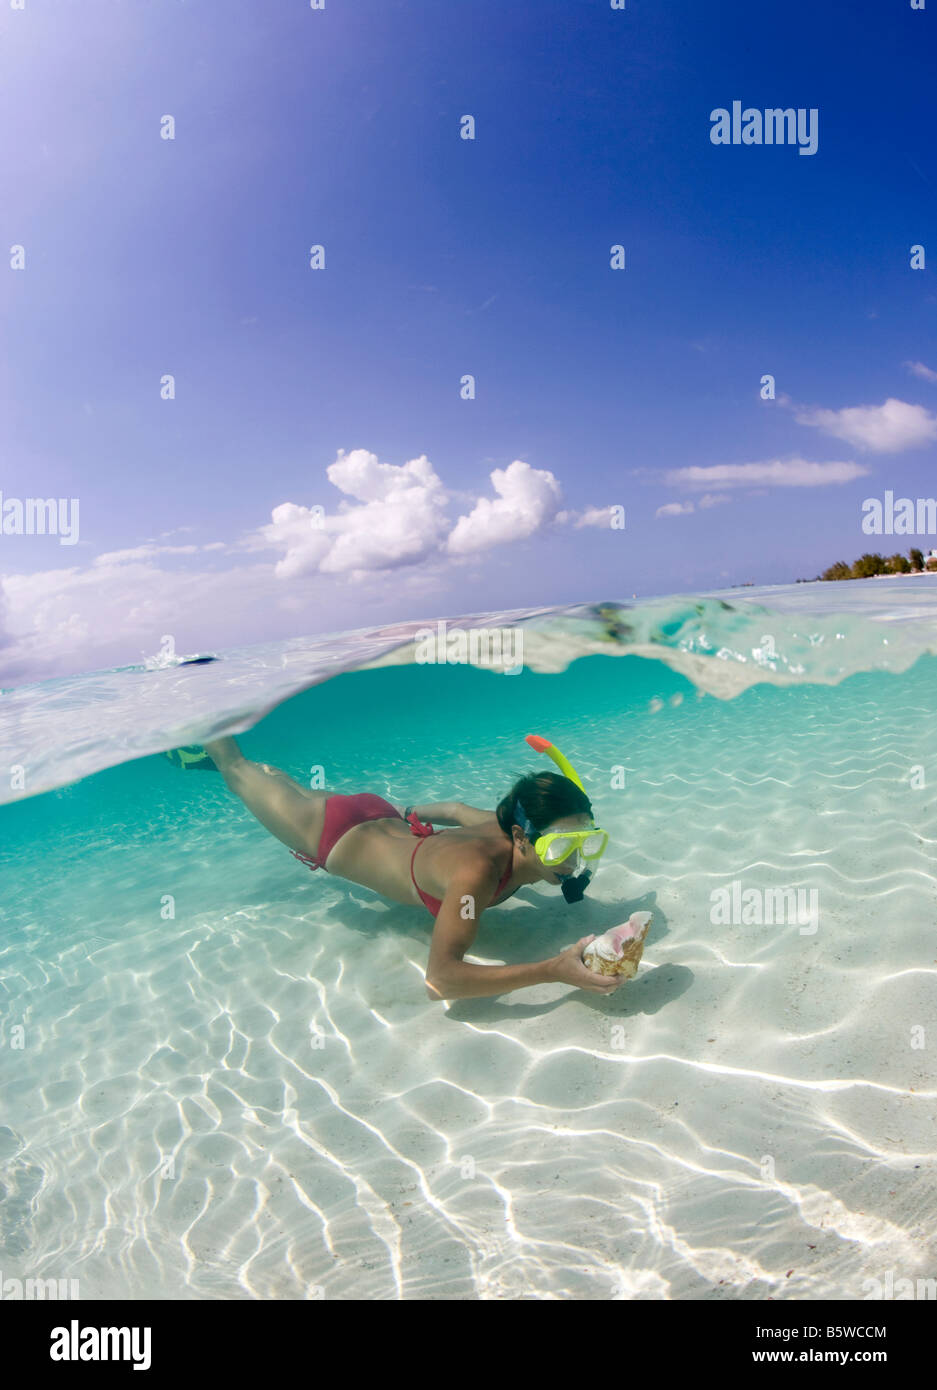 Over/under of Snorkeler at Seven Mile Beach, Grand Cayman Stock Photo